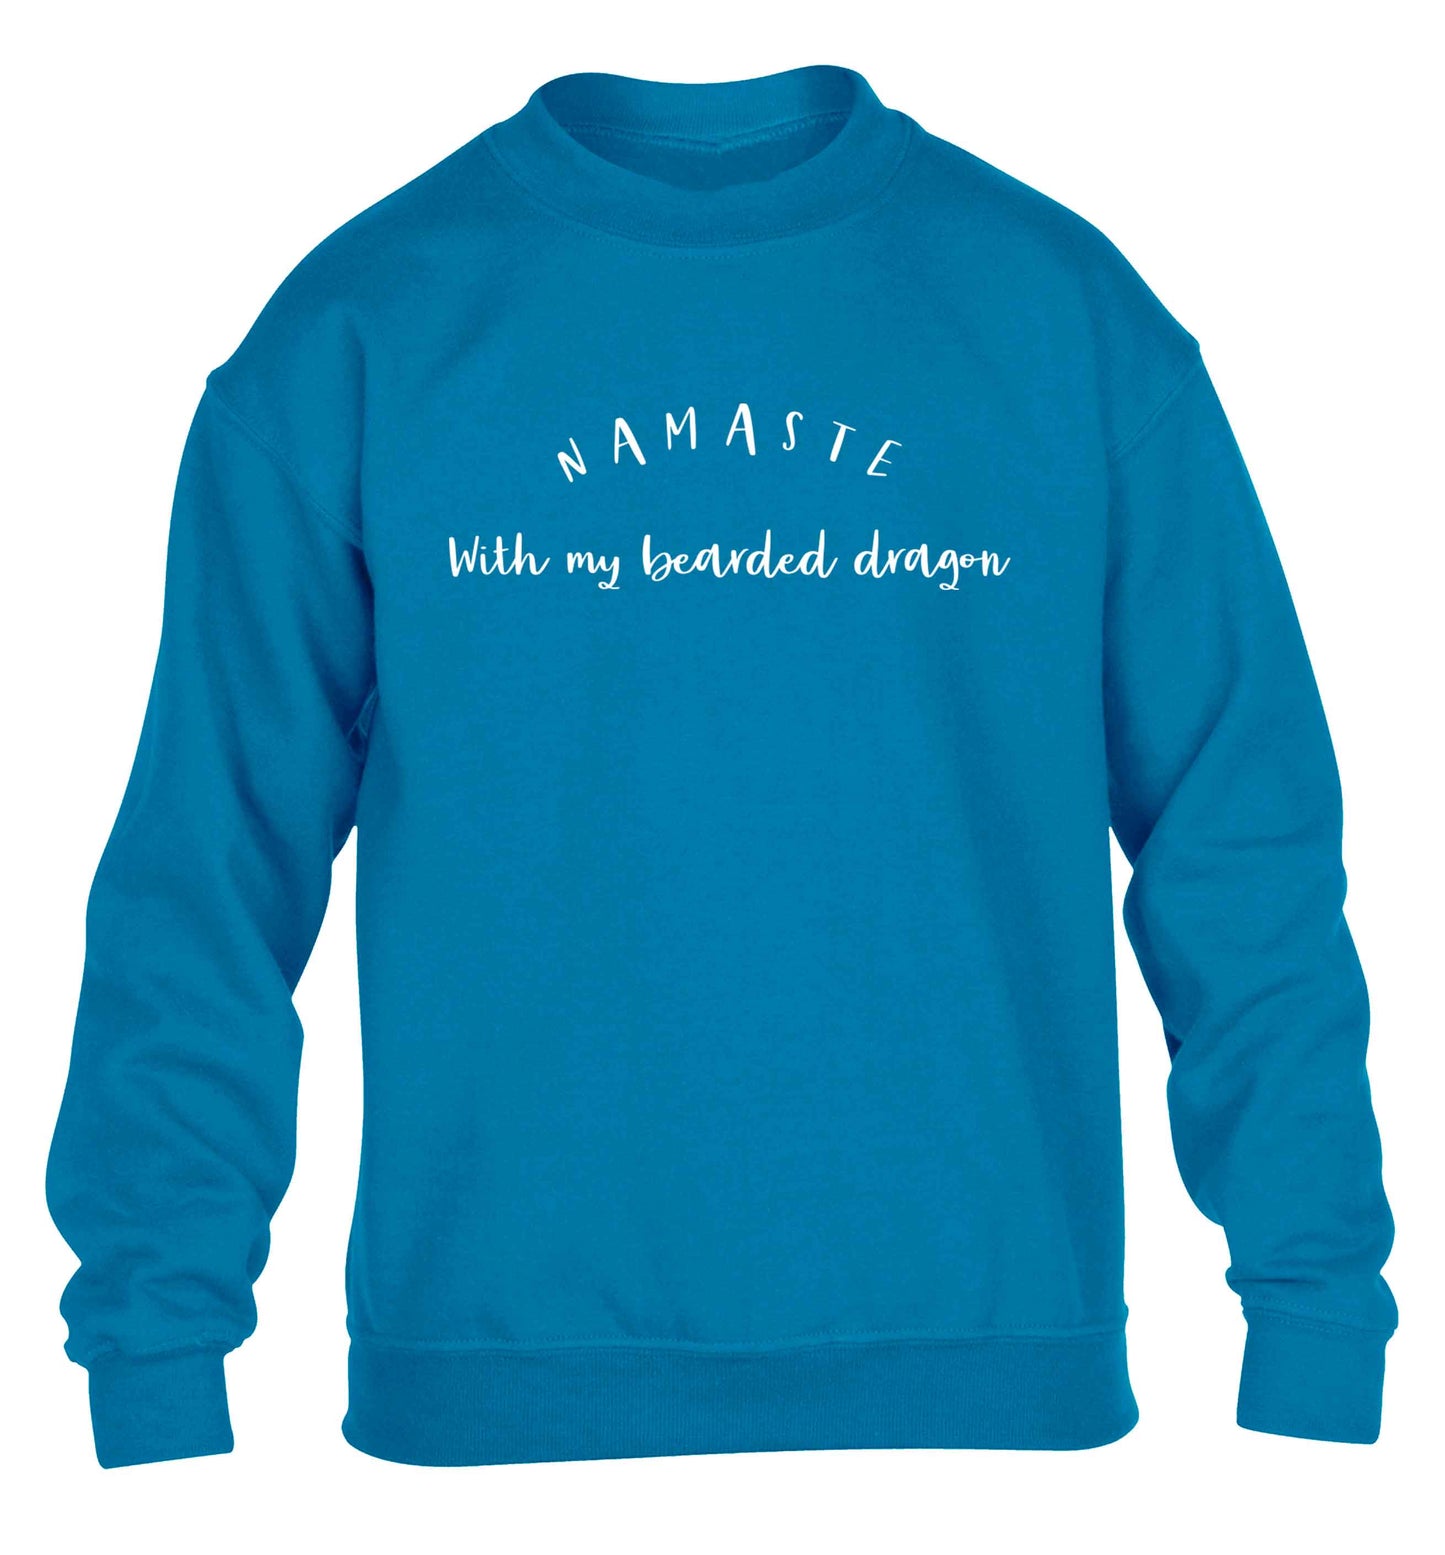 Namaste with my bearded dragon children's blue sweater 12-13 Years